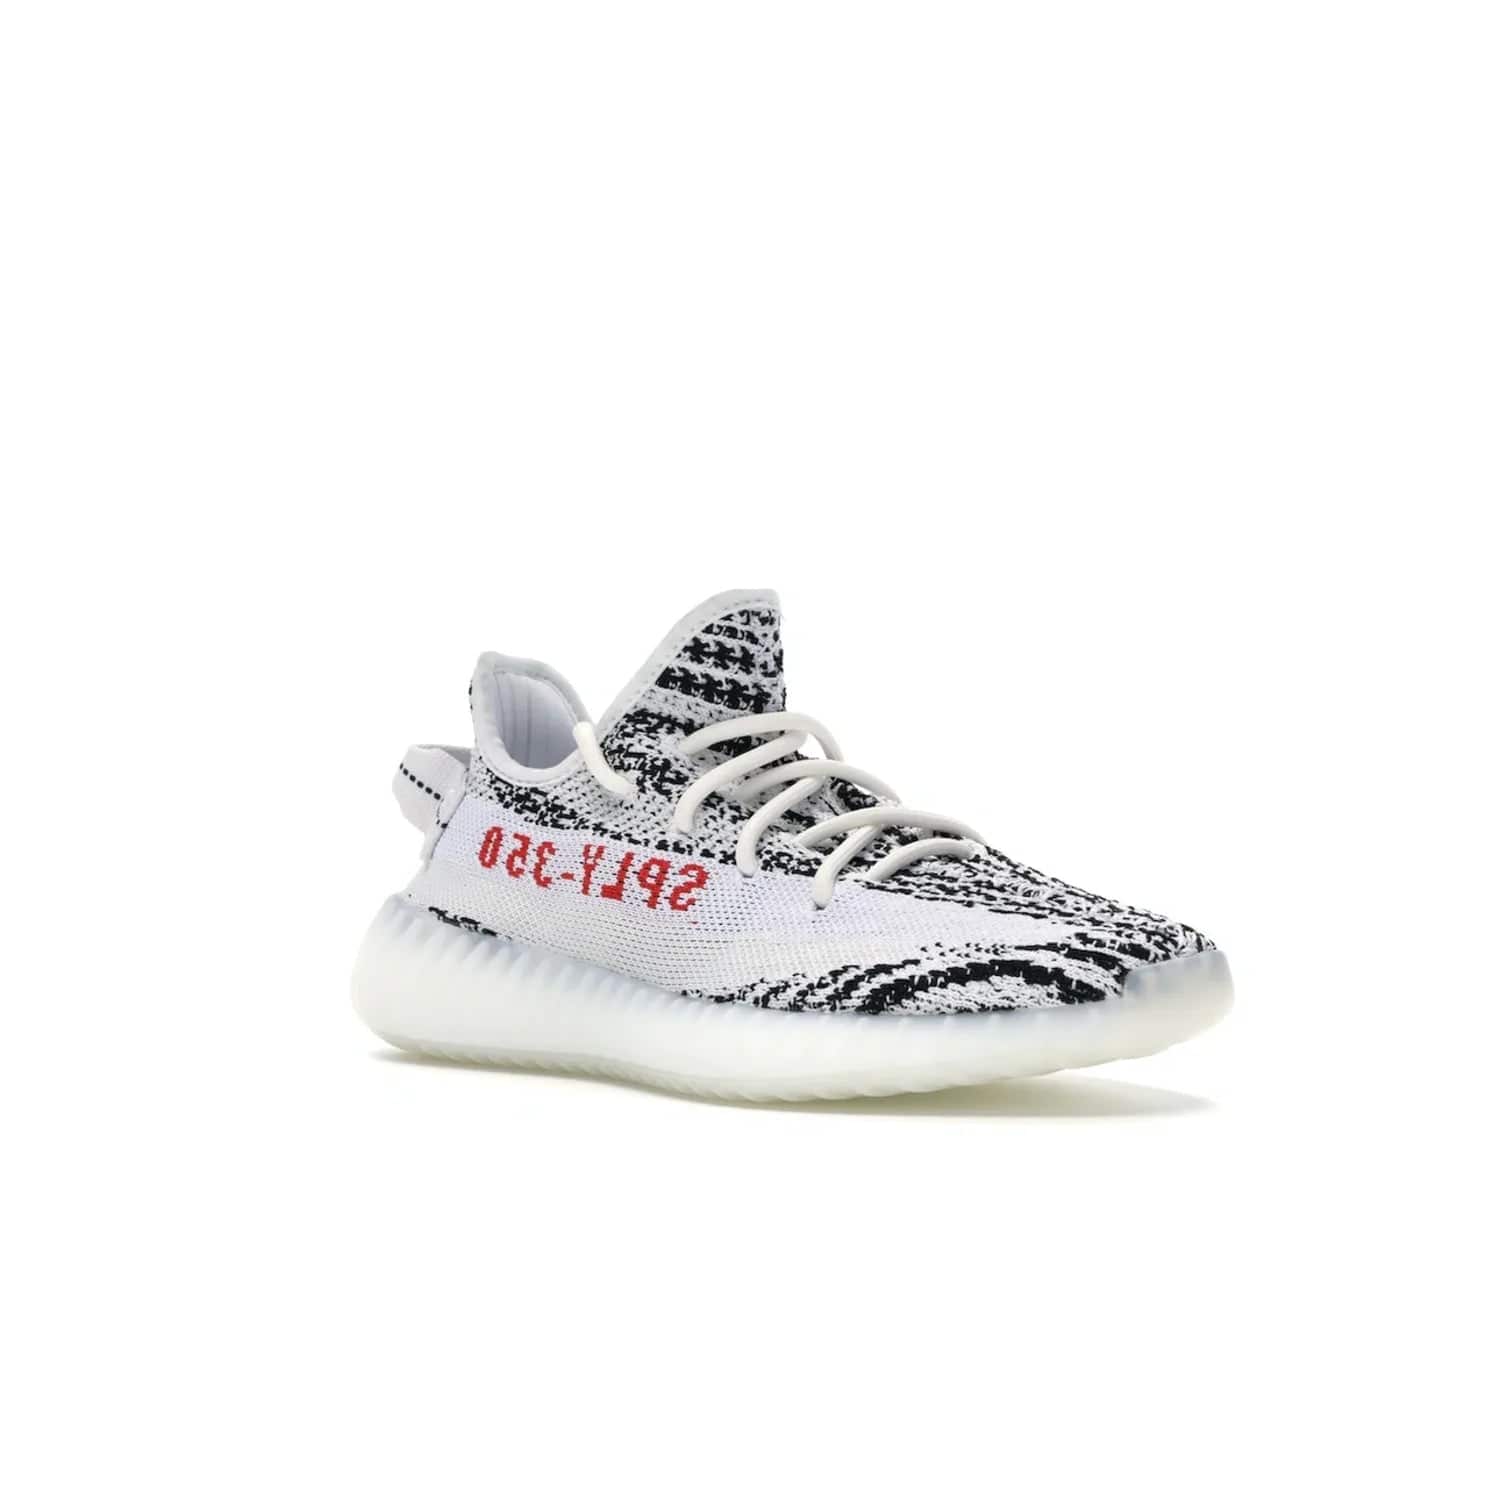 adidas Yeezy Boost 350 V2 Zebra - Image 5 - Only at www.BallersClubKickz.com - #
Score the iconic adidas Yeezy Boost 350 V2 Zebra for a fashionable addition to your street-style. Featuring a Primeknit upper and Boost sole, you'll look great and feel comfortable with every step.